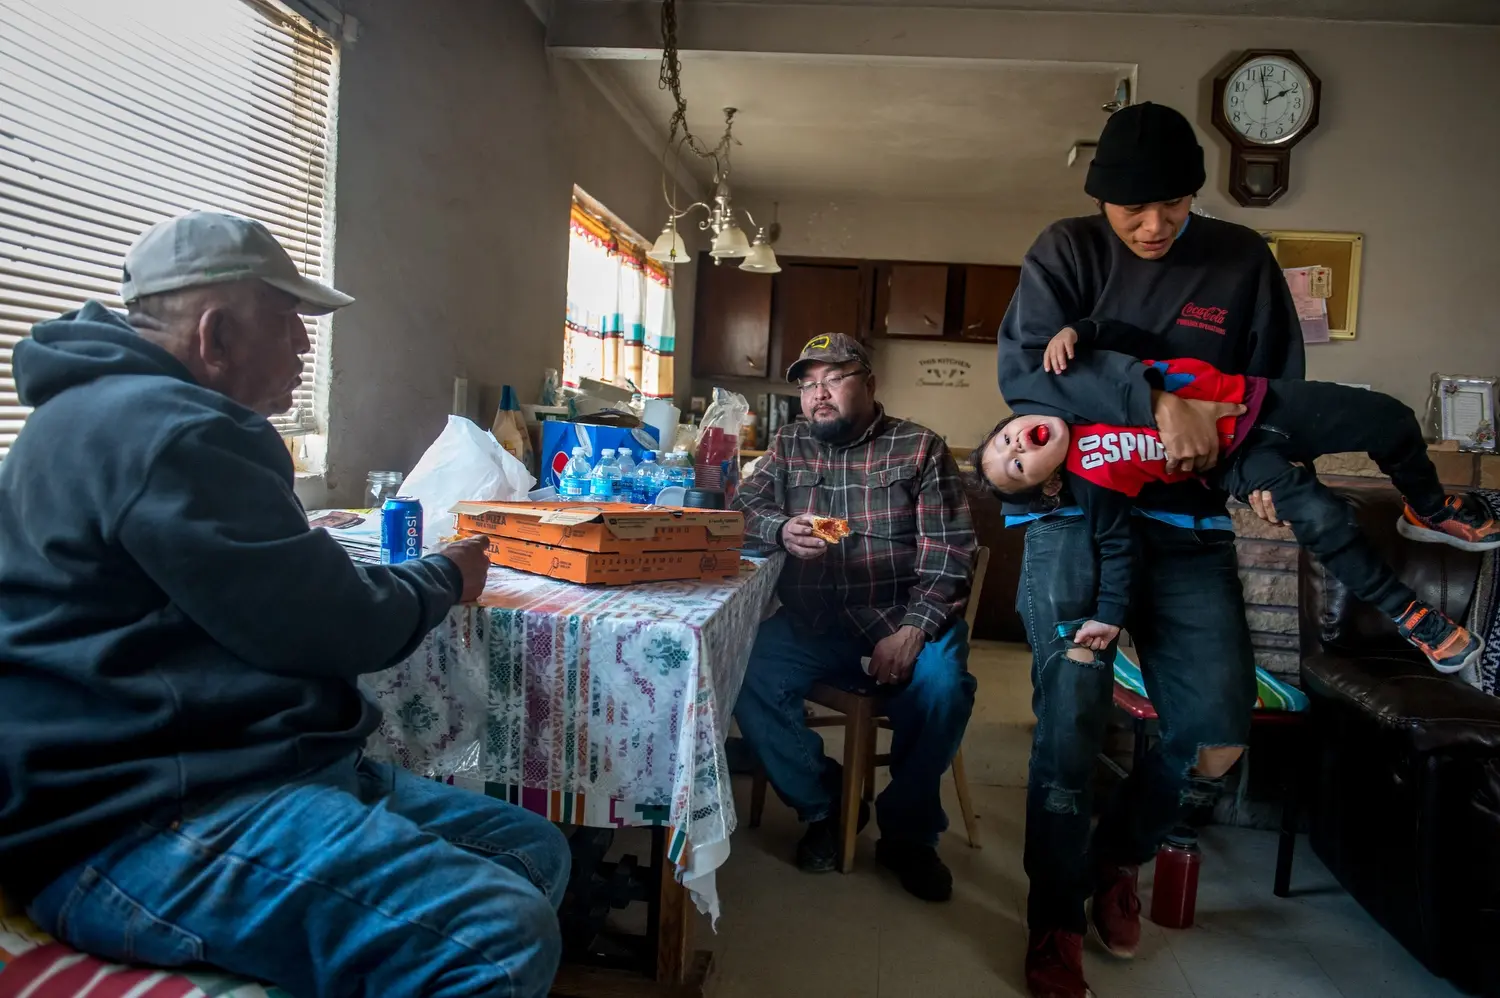 Leroy Canyon, Brandon Canyon, Eagle Spencer and Brandon’s son, Bryce Canyon, are pictured eating pizza at the family home in Tuba City after bringing water to their family’s cattle in Coalmine, Ariz. Image by Mary F. Calvert. United States, 2020.